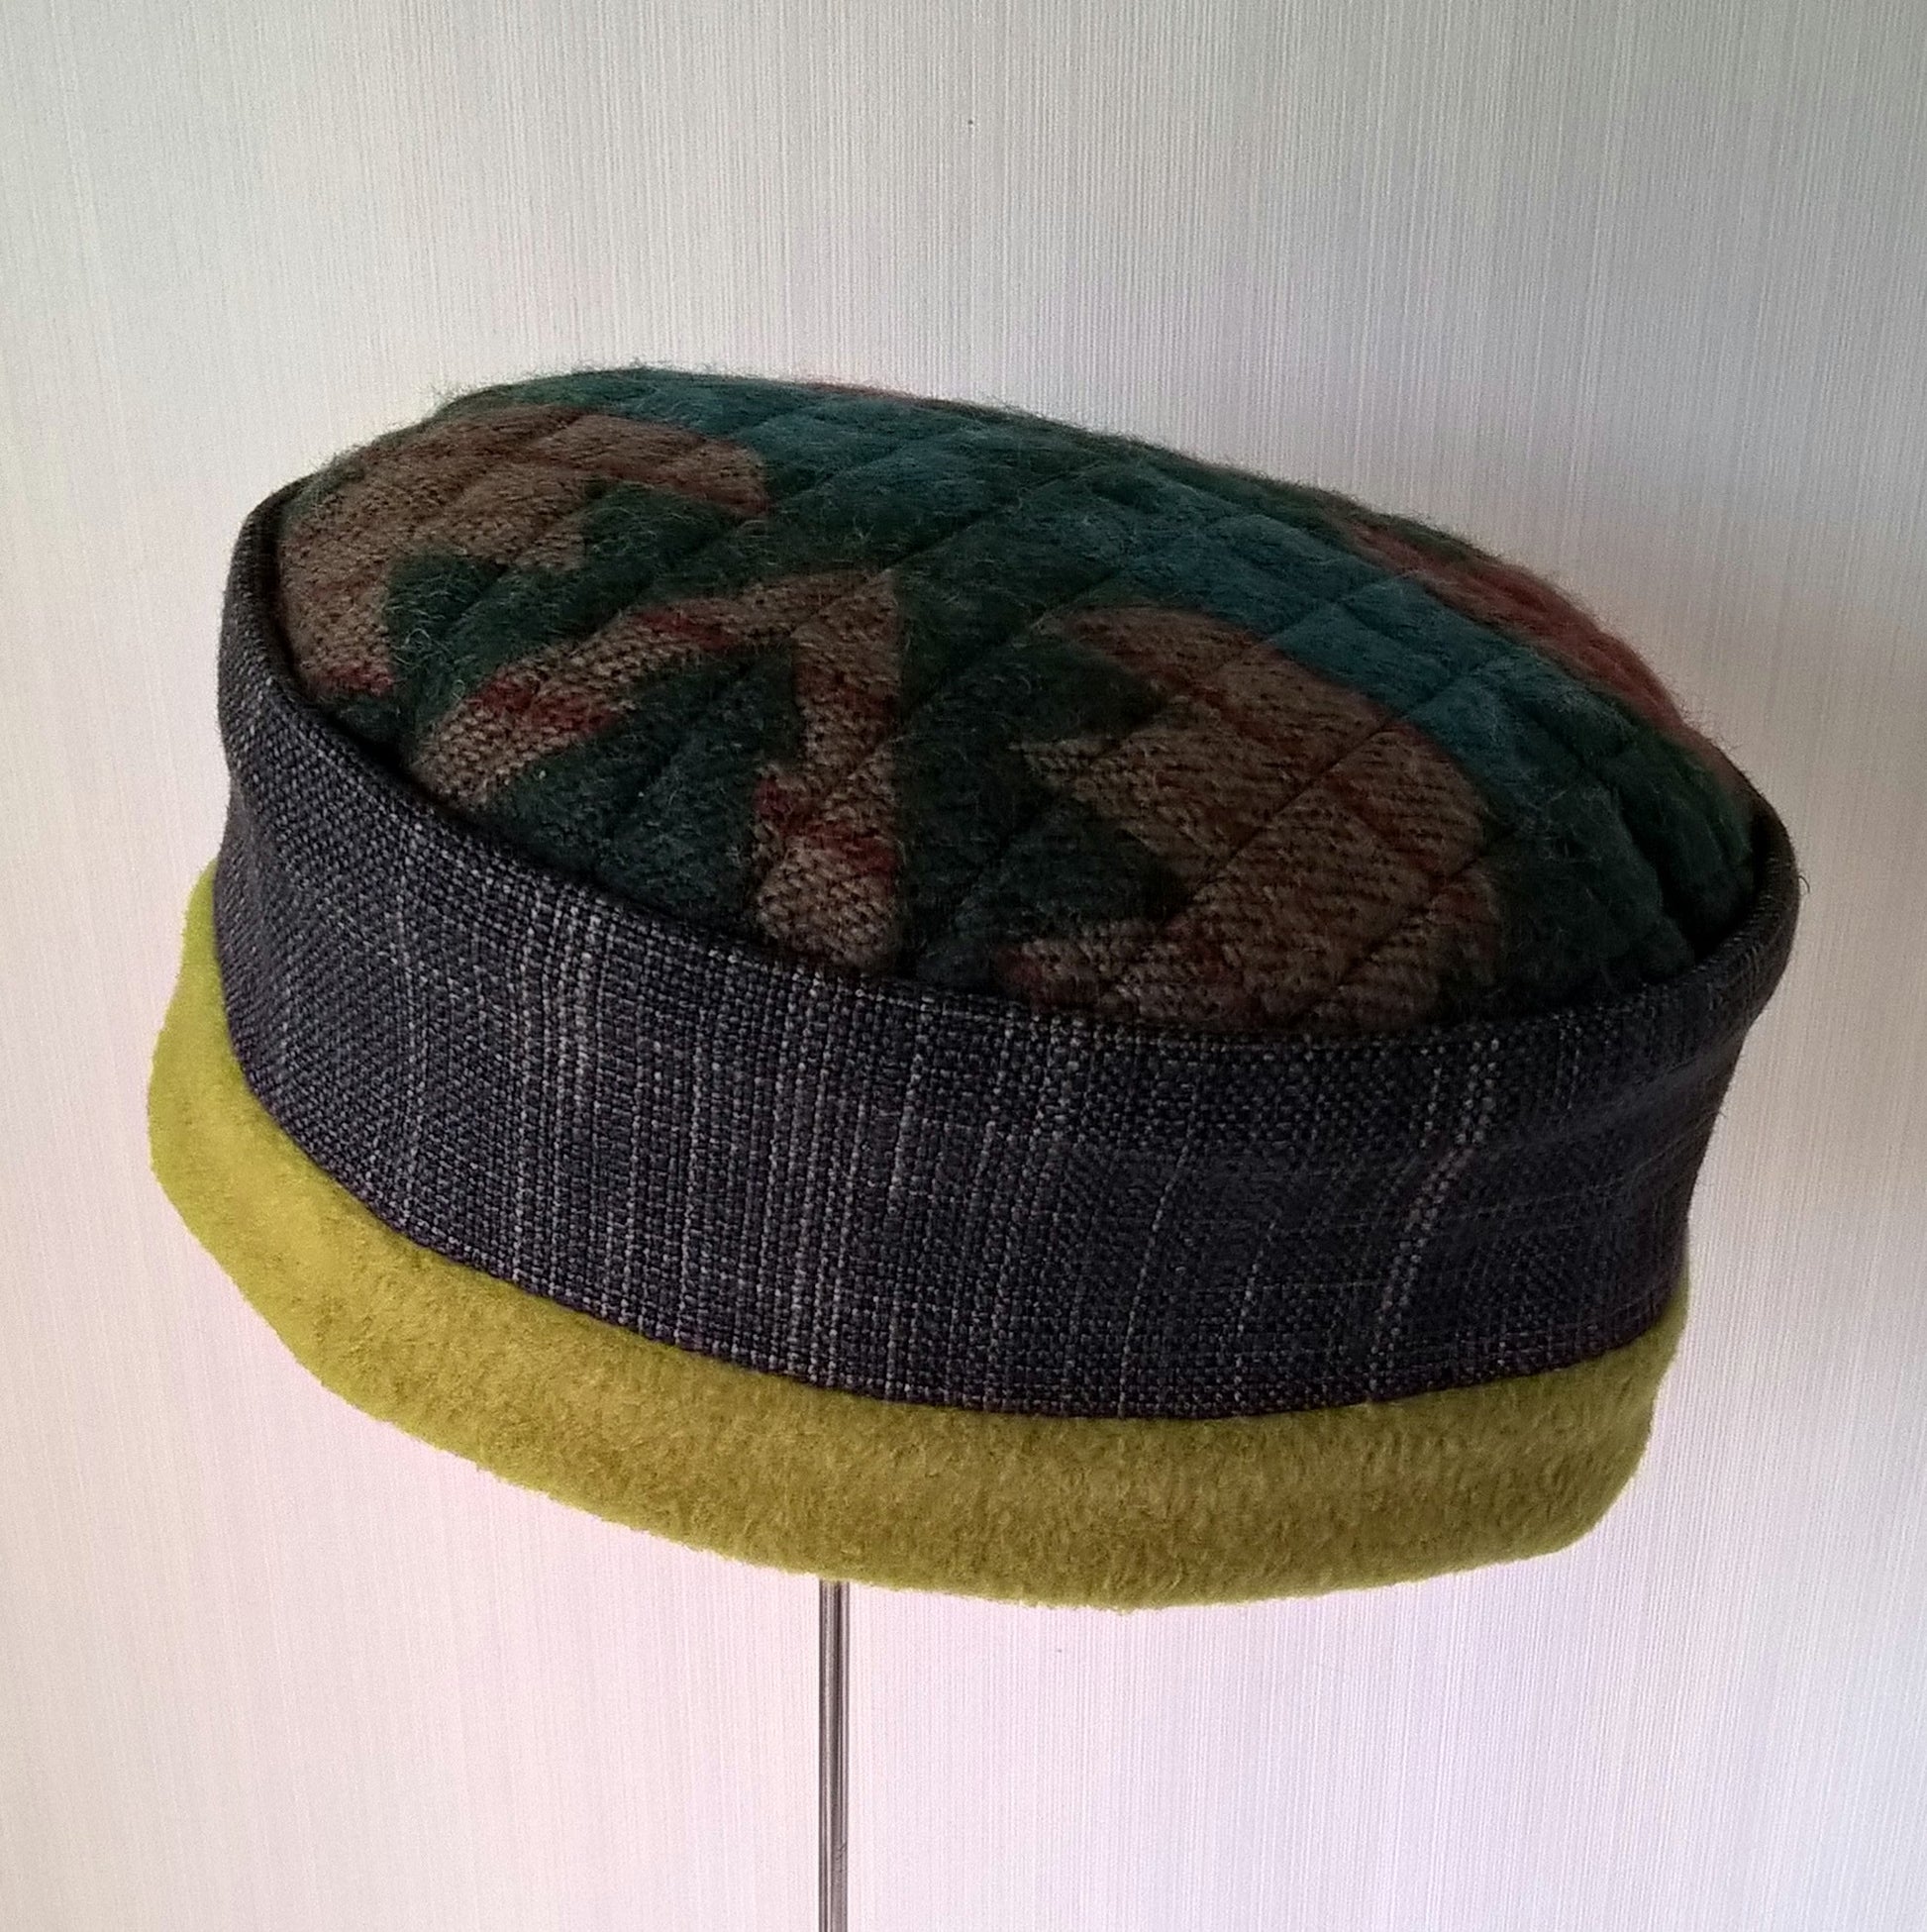 Chartreuse green pillbox style cap with Aztec patterned tip